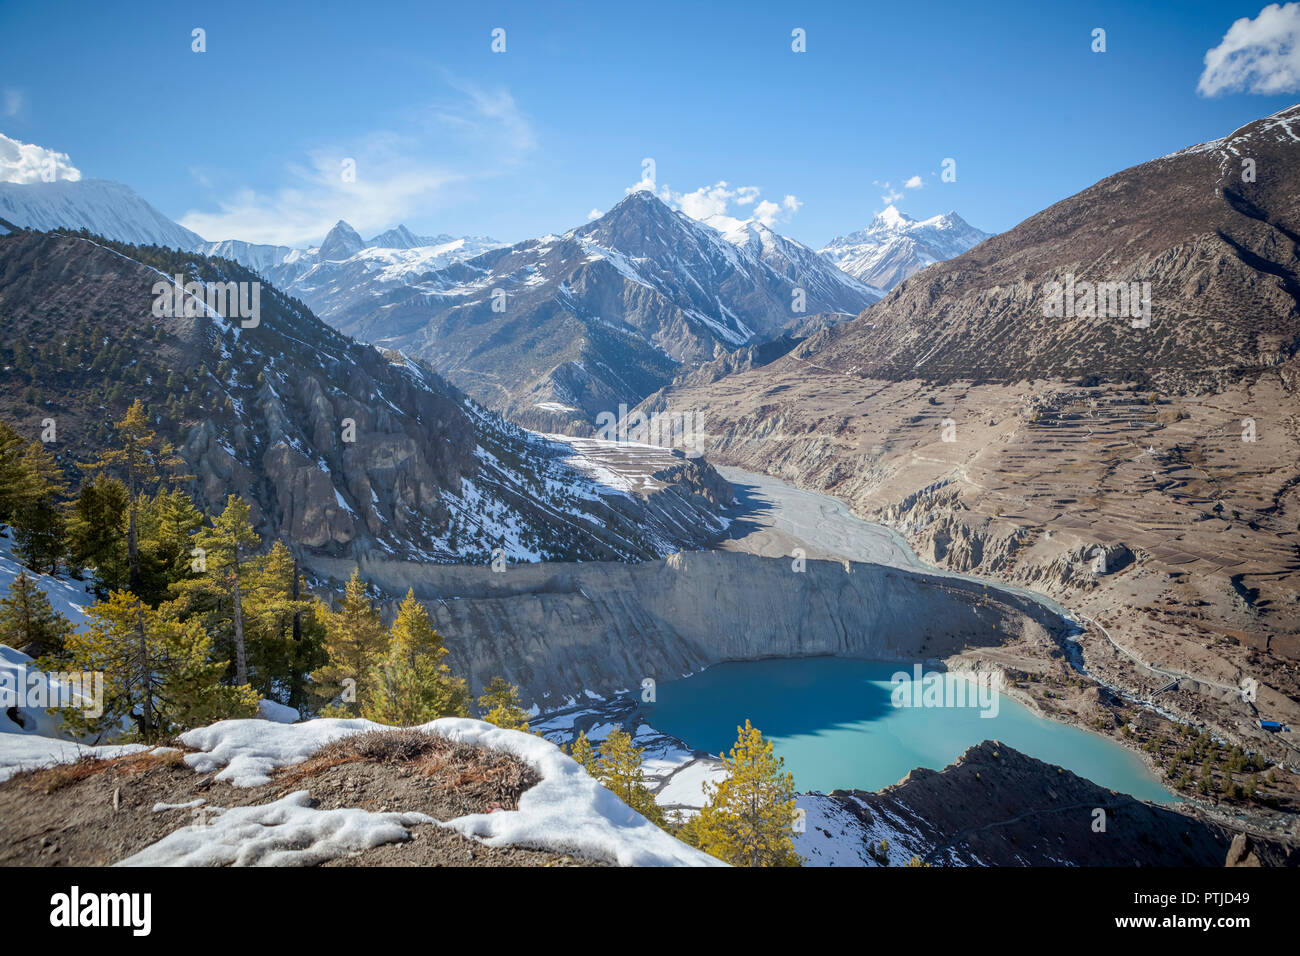 A view of Gangapurna Lake situated at Manang district looking up to Thorung La. Stock Photo